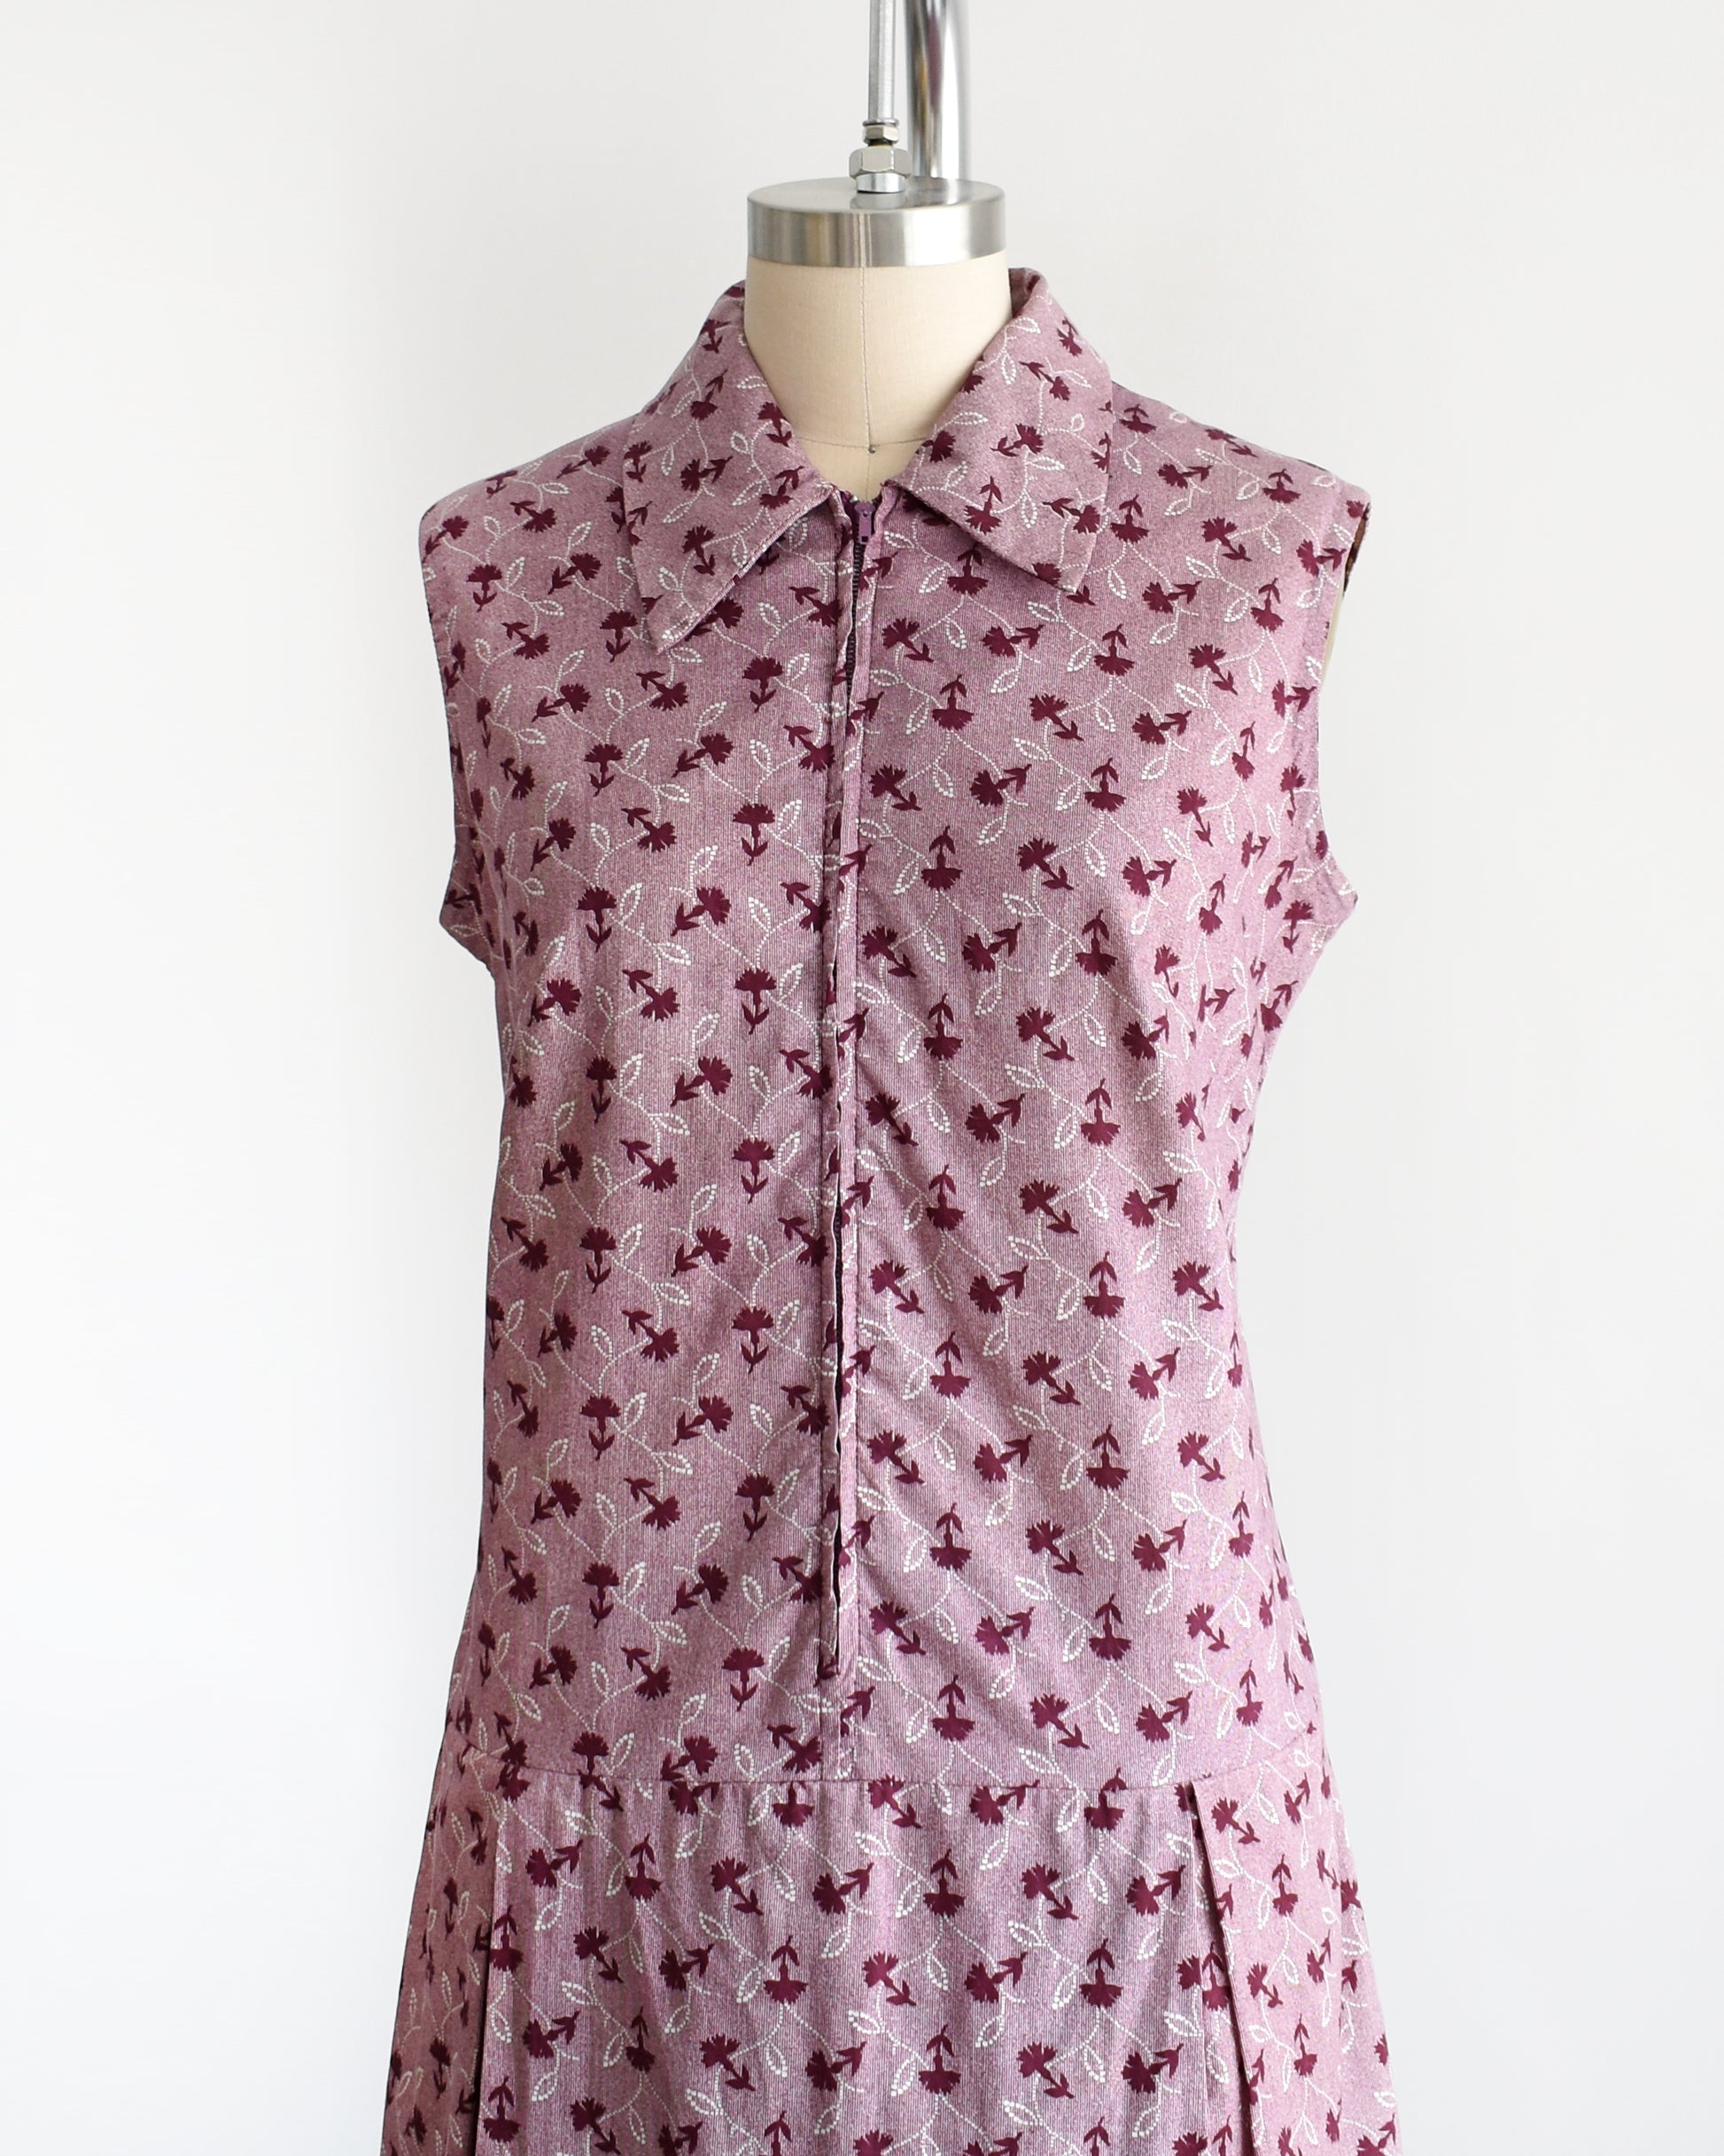 Side front view of a 1970s vintage romper features a cute purple and white floral print, a collared neckline, and a metal zipper closure down the front. 